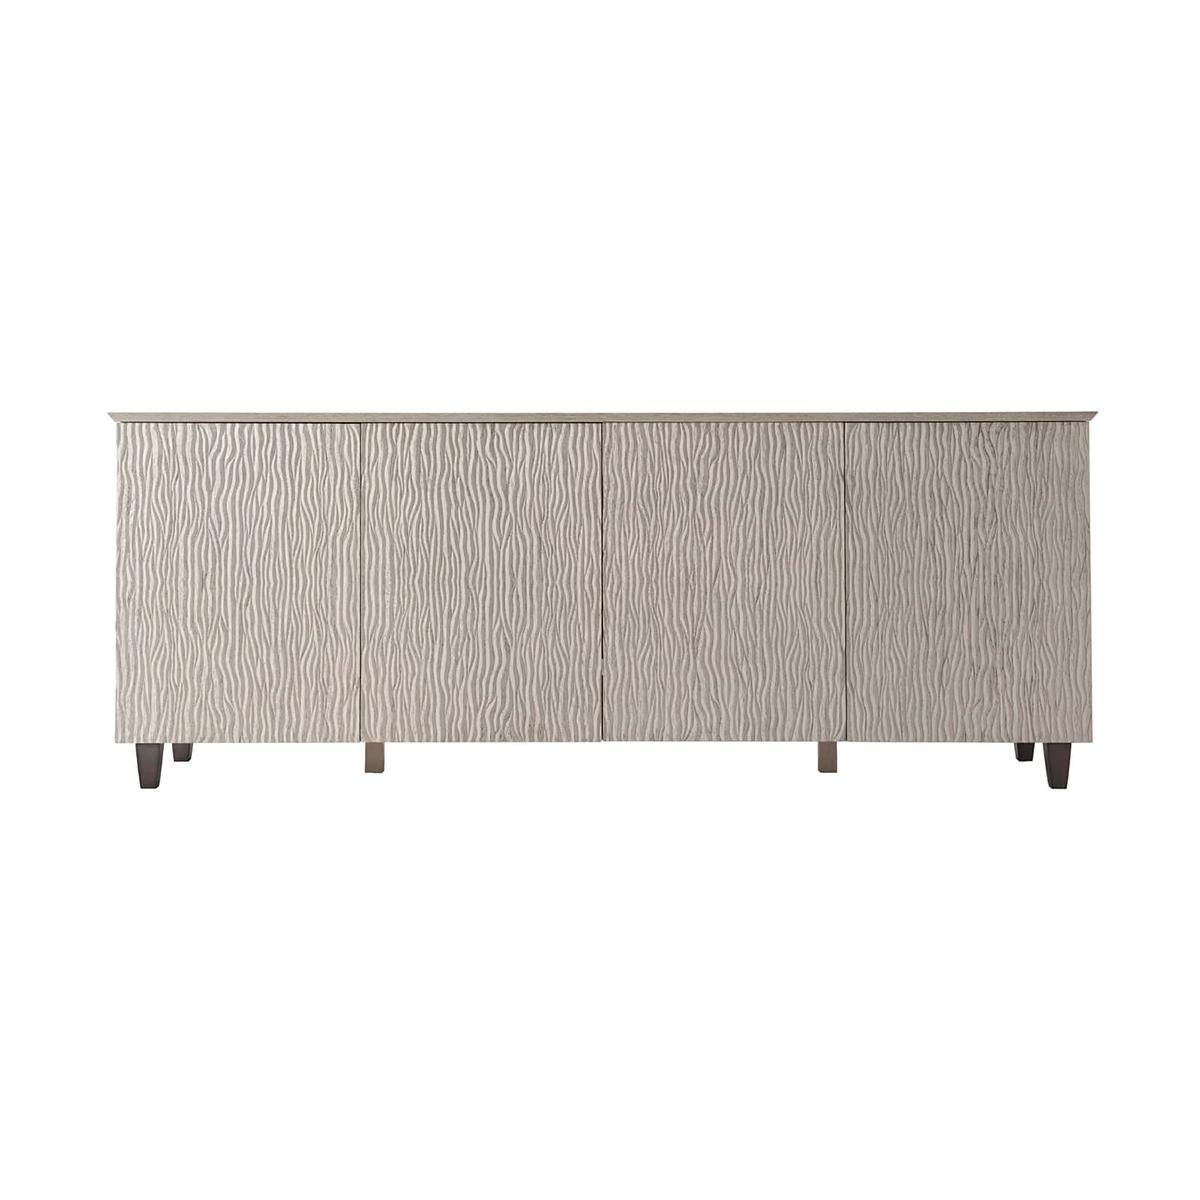 Organic modern Ripple oak sideboard with a rectangular knife edge top, brushed quarter oak veneers, with four ripple carved oak doors in our light Gowan finish raised on square tapered legs.

Dimensions: 80